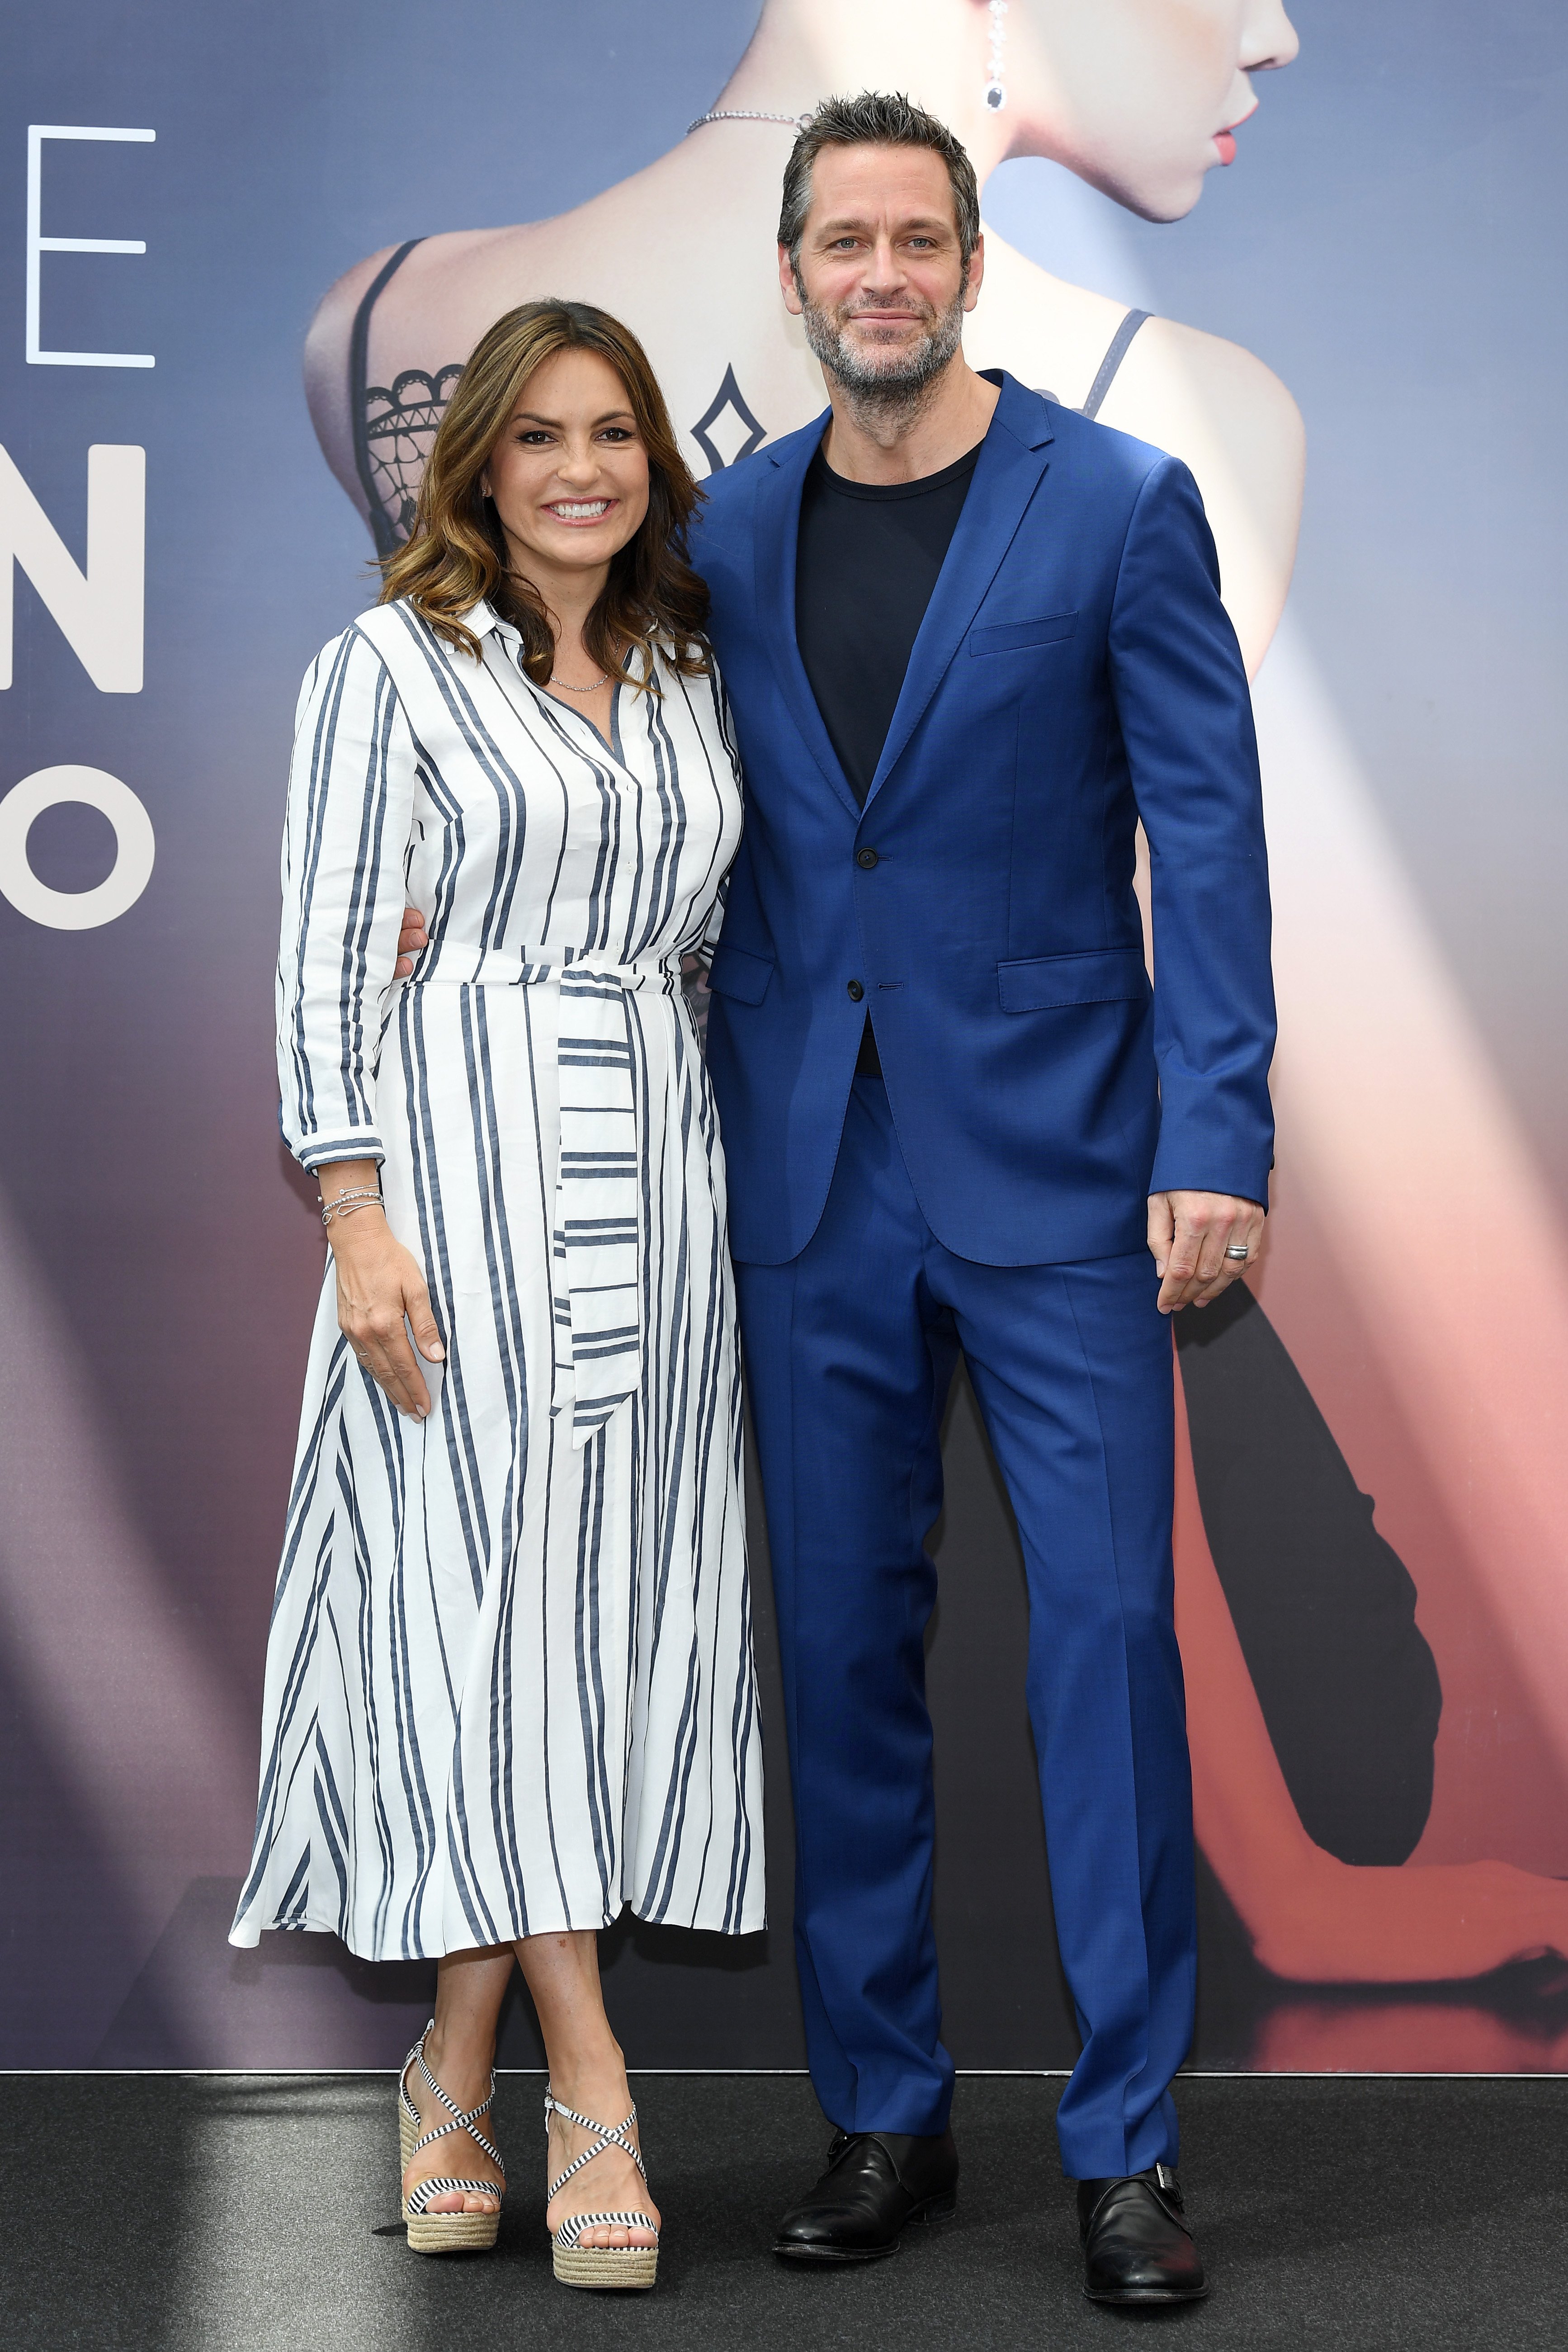 Mariska Hargitay and Peter Hermann attend a photocall during the 58th Monte Carlo TV Festival on June 17, 2018. | Photo: GettyImages